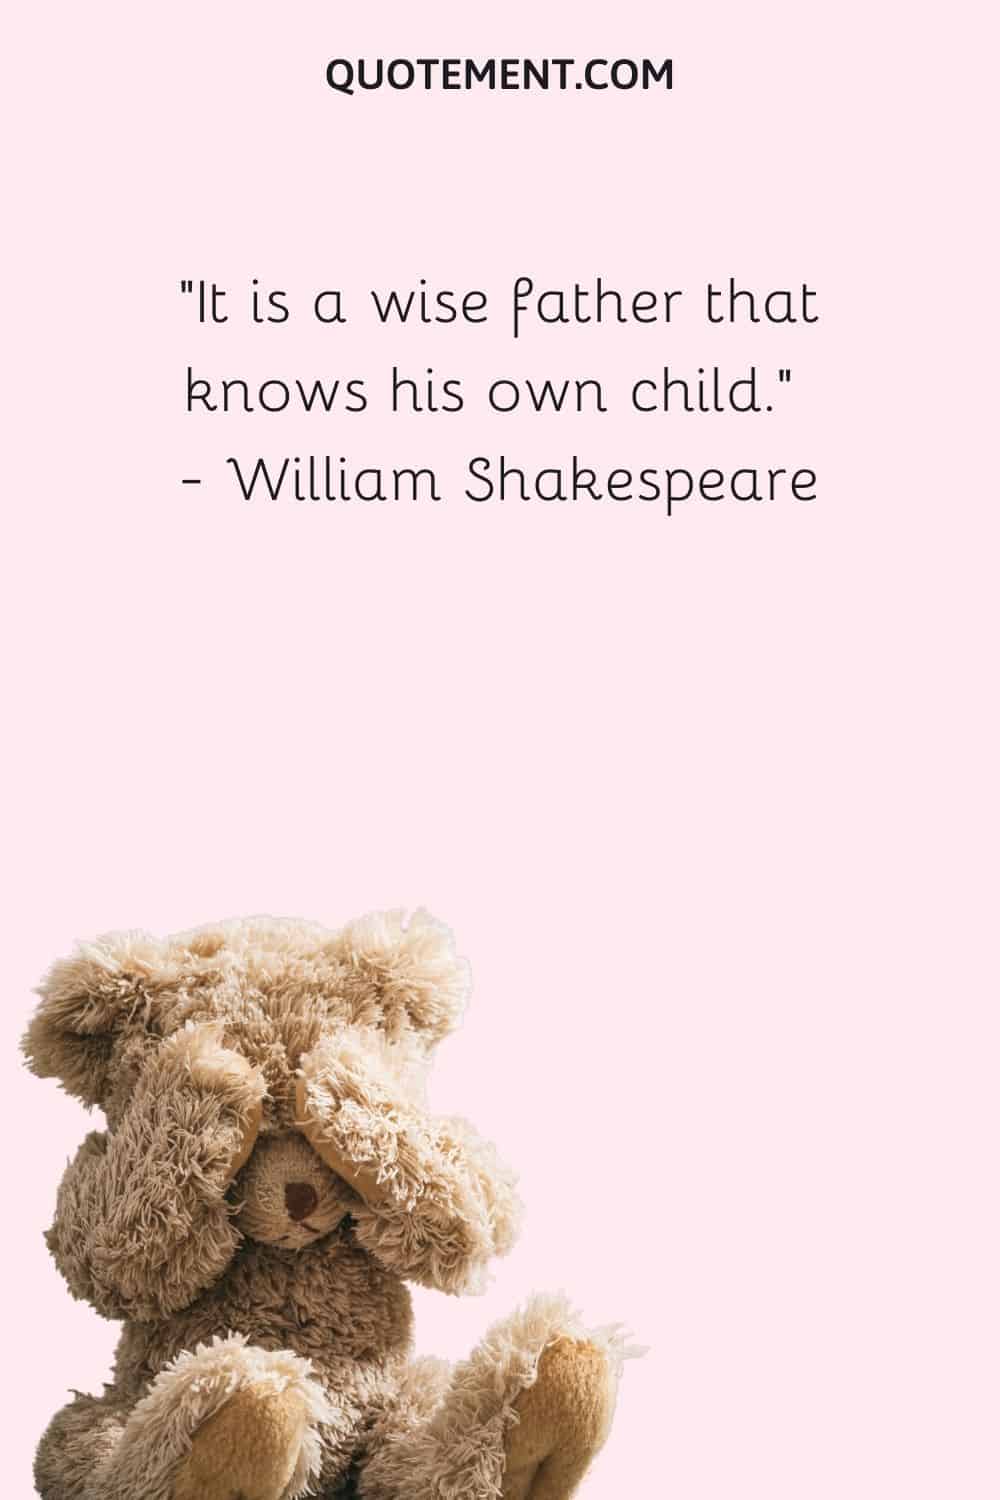 It is a wise father that knows his own child. — William Shakespeare